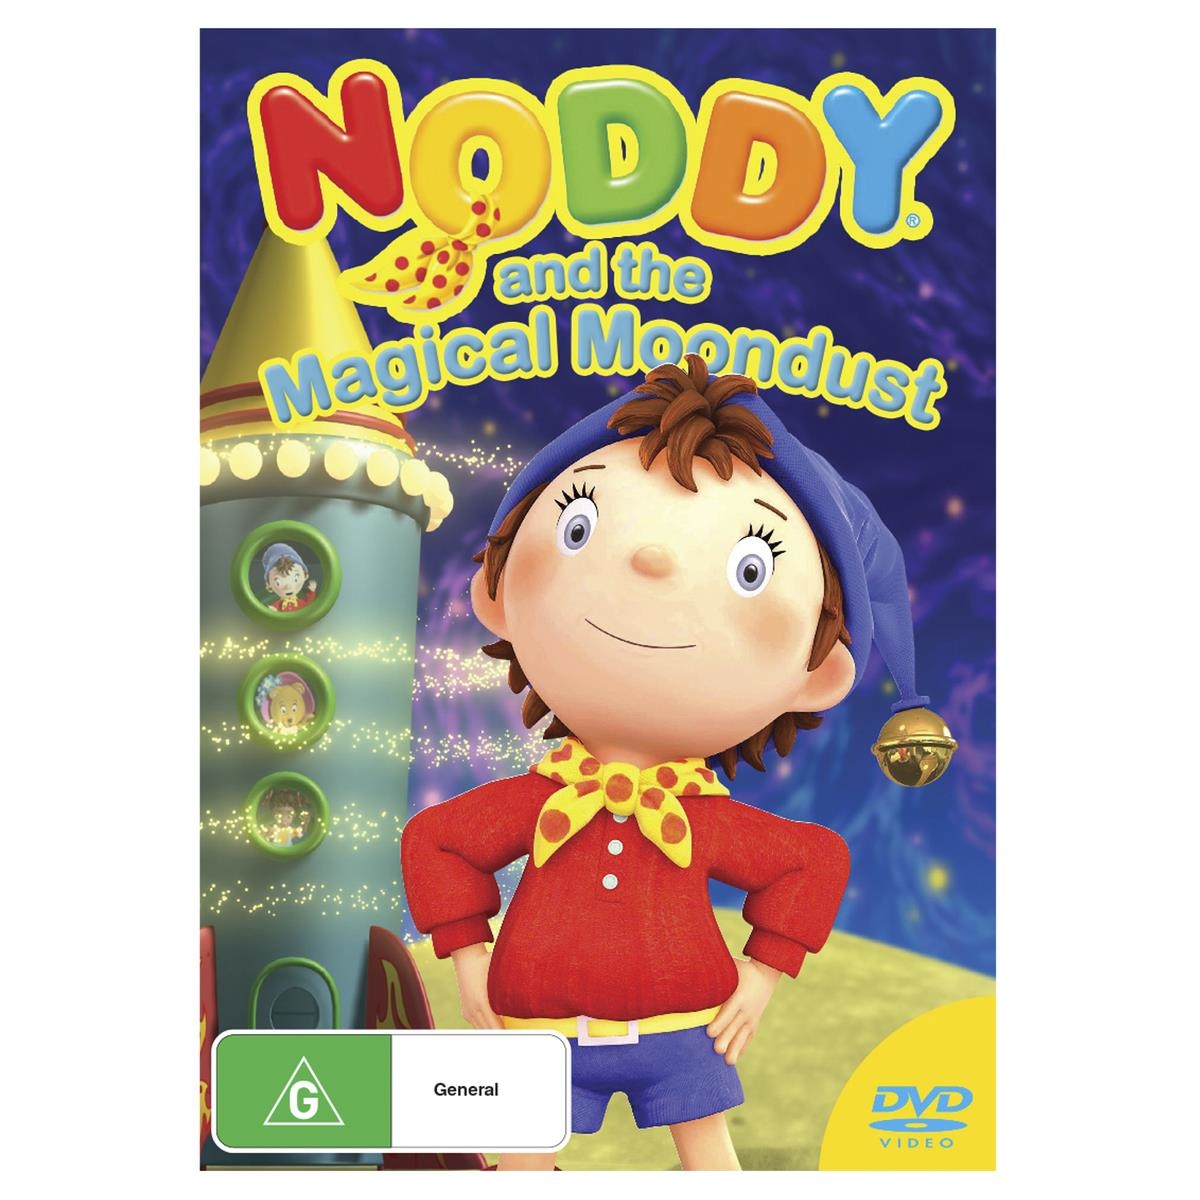 Noddy and the Magical Moondust - DVD